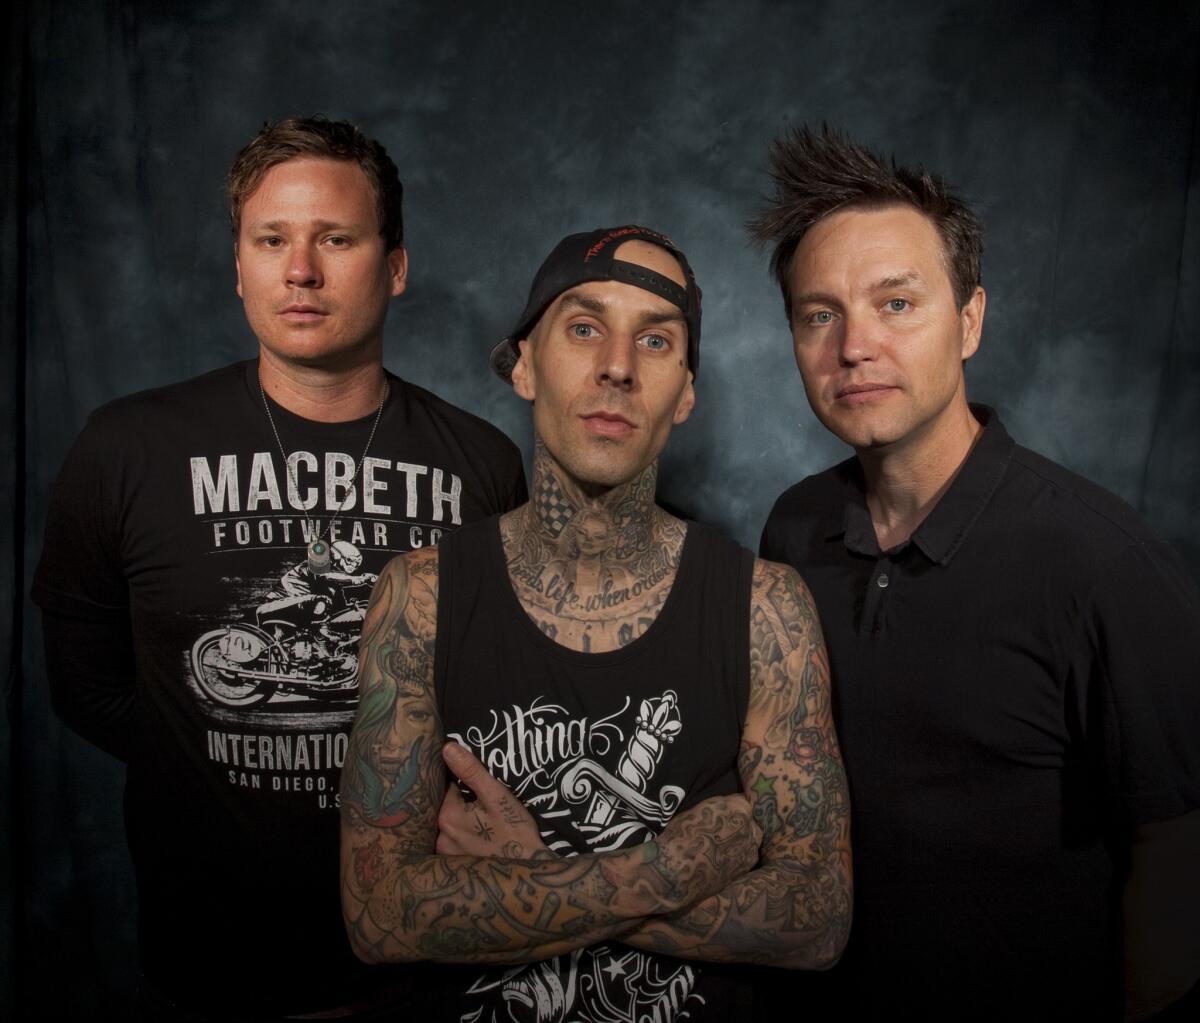 Tom DeLonge responds to Blink-182 fallout with letter - Los